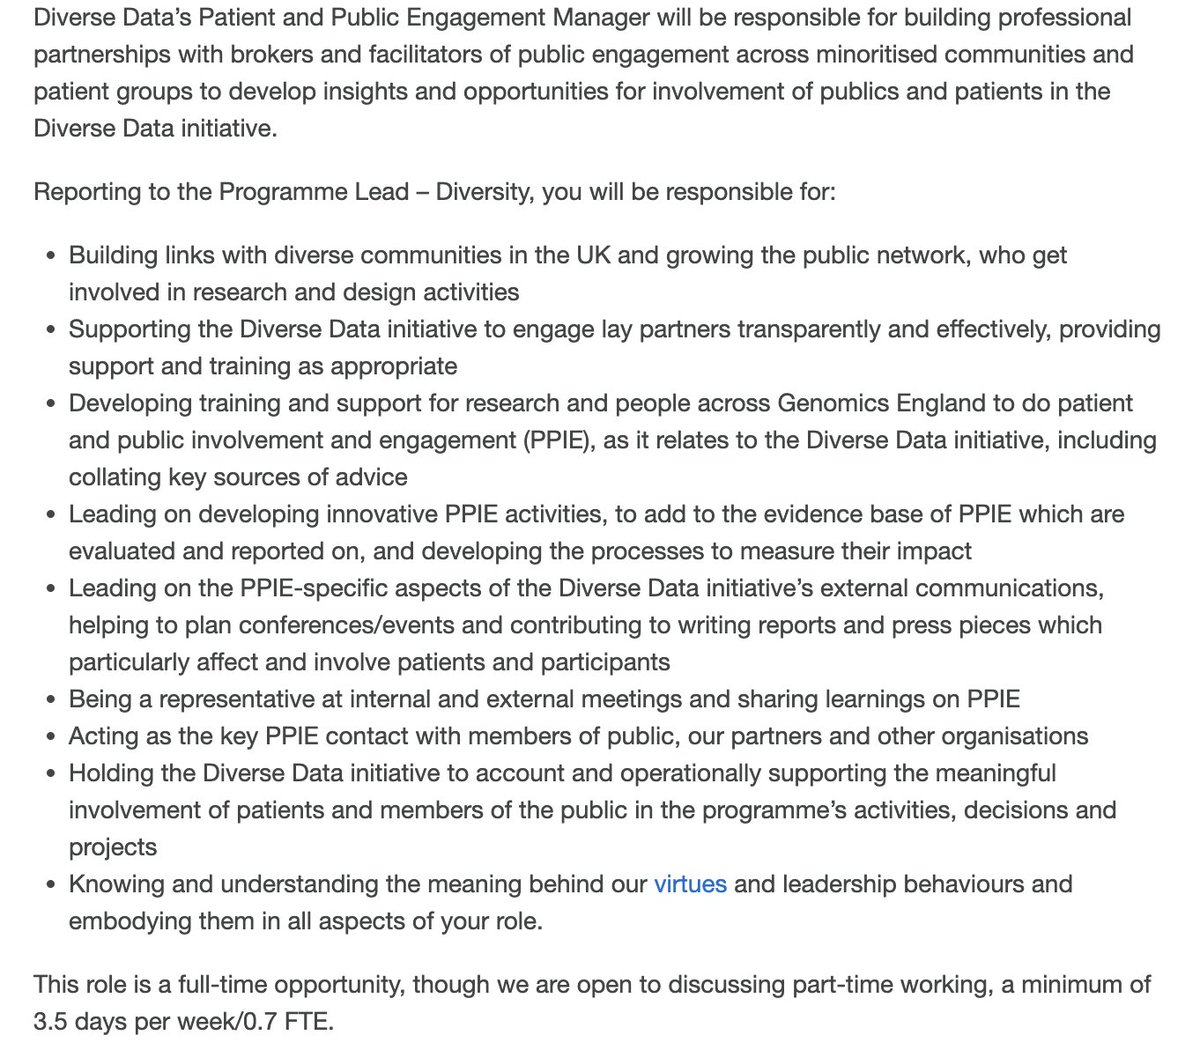 📢New job alert #jobfairy 🧚‍♀️ Come and work with me in the Diverse Data initiative @GenomicsEngland as our Patient & Public Engagement #PPIE Manager!! ⏰ Deadline 20th Jan - just submit your CV and you're good to go! Apply ➡️smrtr.io/cDvQf #data #diversity #genomics